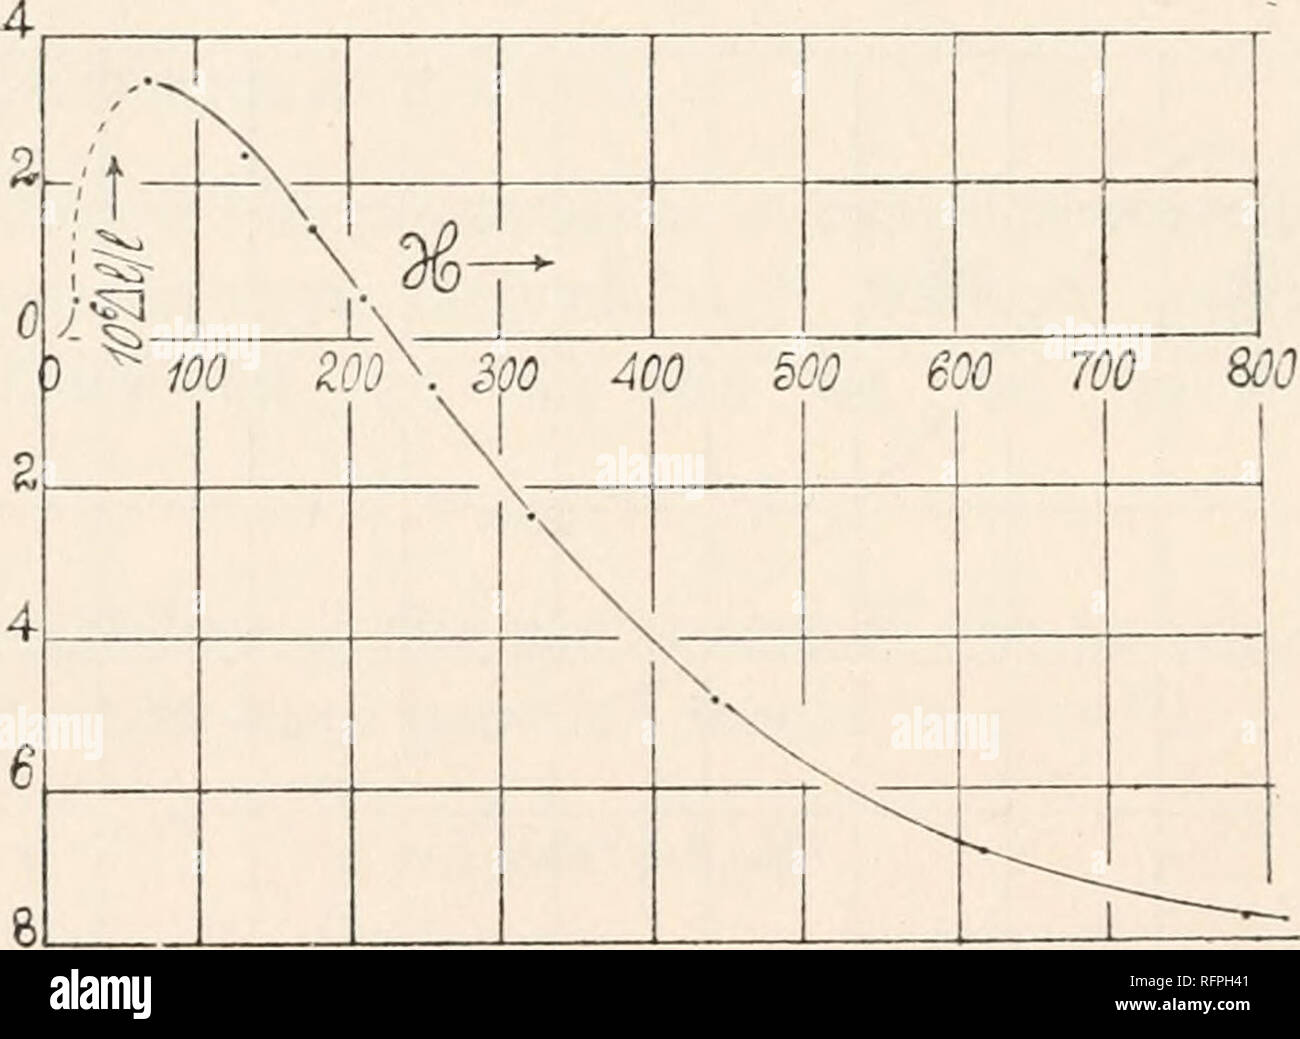 . Carnegie Institution of Washington publication. 32 DISPLACEMENT INTERFEROMETRY BY TABLE 3. — Elongation of an iron rod, length 43 cm.; diameter 0.67 cm. Factor 4-5Xio-7. = uojgauss. i H &amp;e io6A//7 i H ke iof-A/// ampere gauss ampere gauss 0.74 81 6.0 2.7 2-3 253 - i-5 -0.7 1.90 209 •5 0.2 3-9 429 - 9.4 -4.2 1.20 132 3-7 i-7 7-7 847 -15-0 -6.8 .80 88 6.0 2-7 7-7 847 -13.0 -5-9 .40 44 6.0 2.7 7-7 847 -15.0 -6.8 3-9 429 - 8.5 -3-8 7-5 825 -13.0 -5-9 1.8 198 — o.o —o.o 3-9 429 - 9-5 -4-3 2-3 253 - i-5 -0.7 1.8 198 — o.o —o.o 7 The curve in figure 33 crosses the axis (original length restored Stock Photo